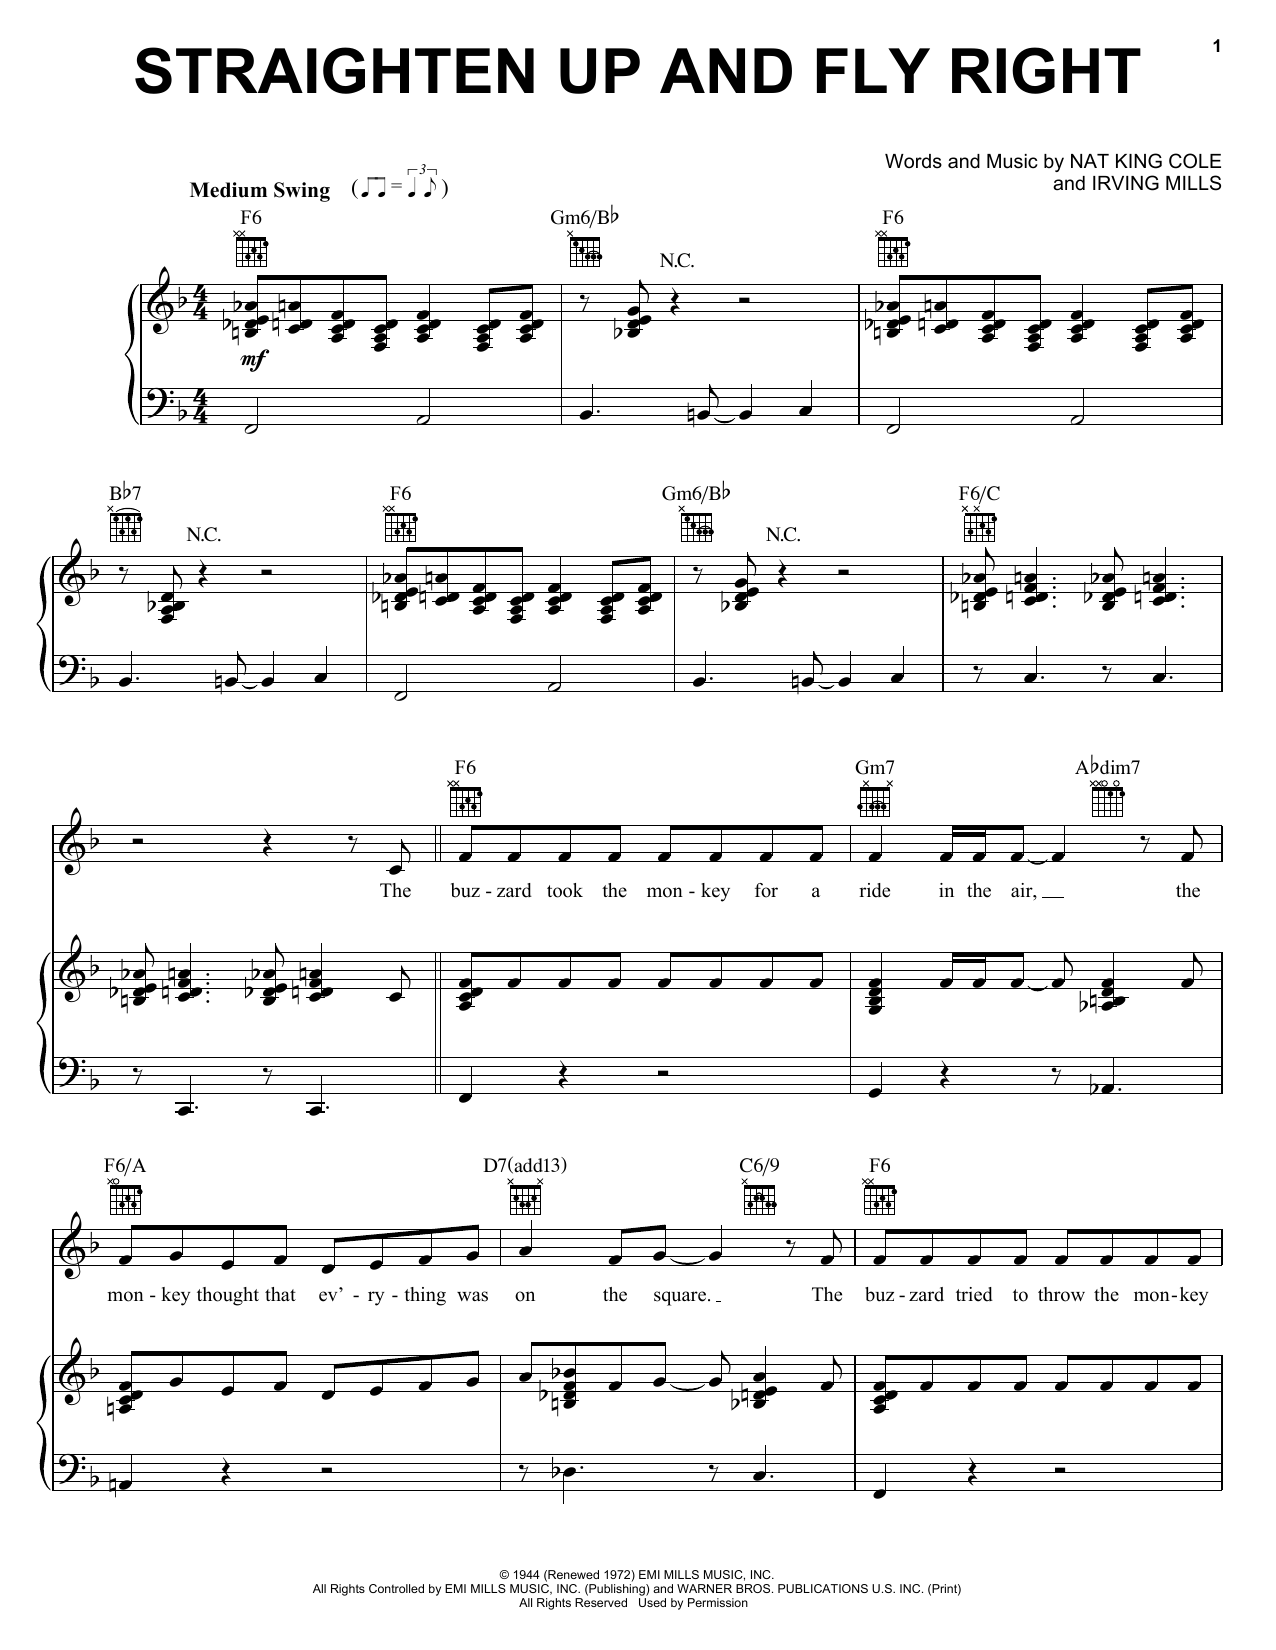 Download Diana Krall Straighten Up And Fly Right Sheet Music